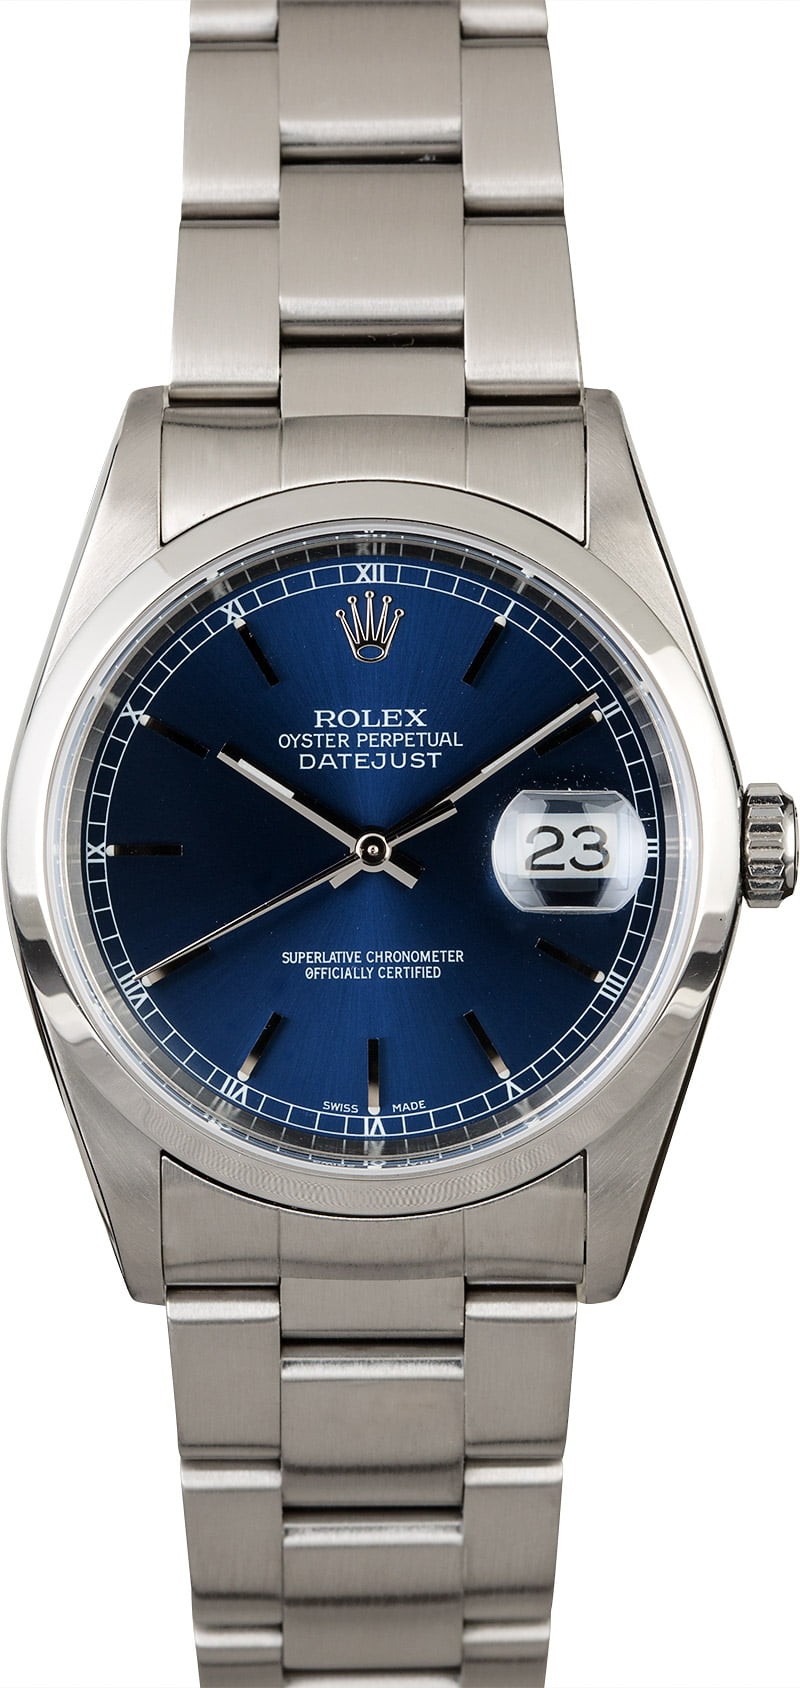 Rolex Datejust 16200 Blue Dial Steel Oyster WE03576